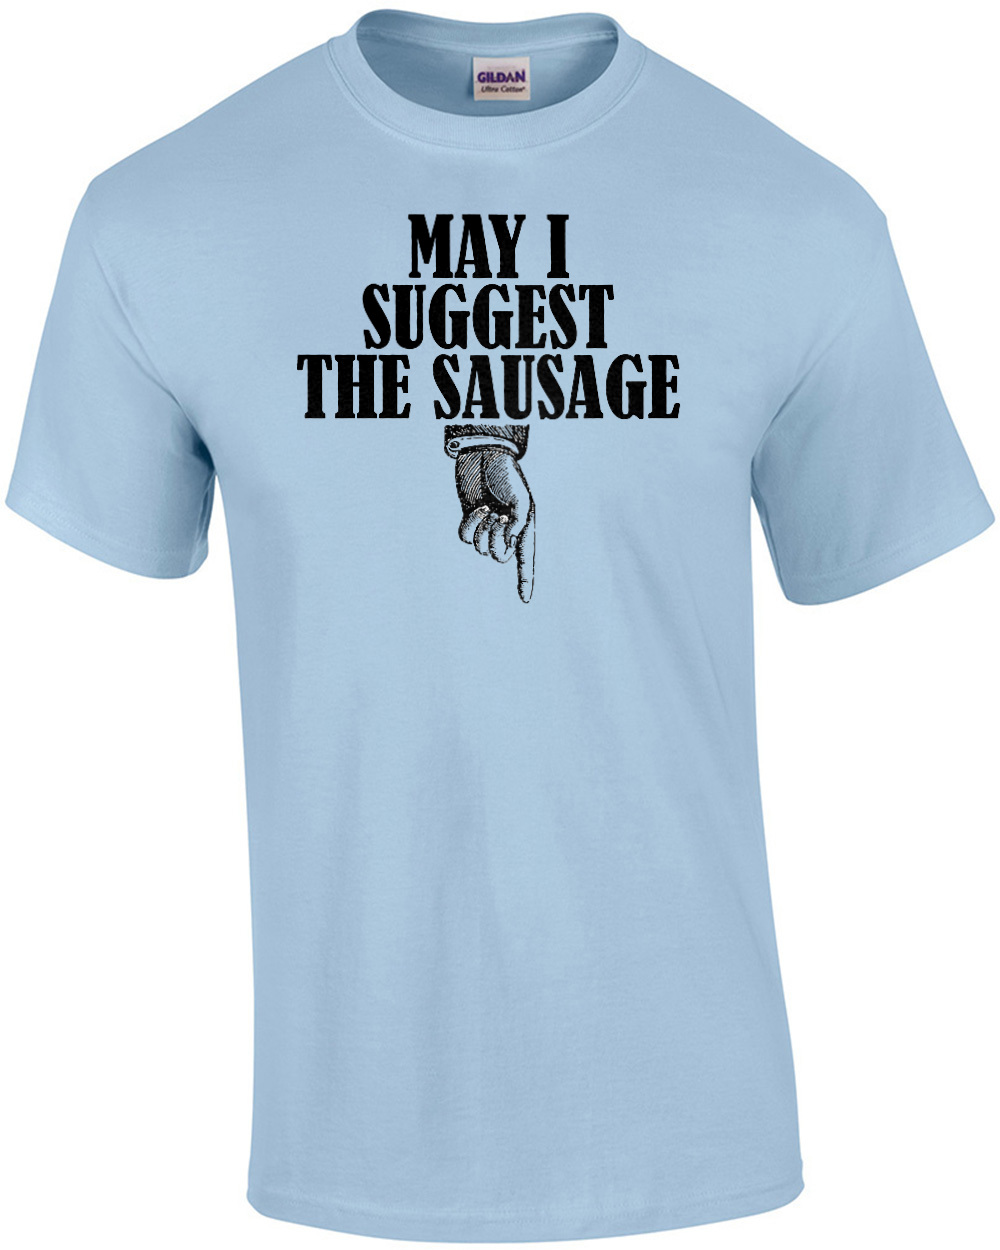 May I suggest - funny offensive t-shirt | eBay